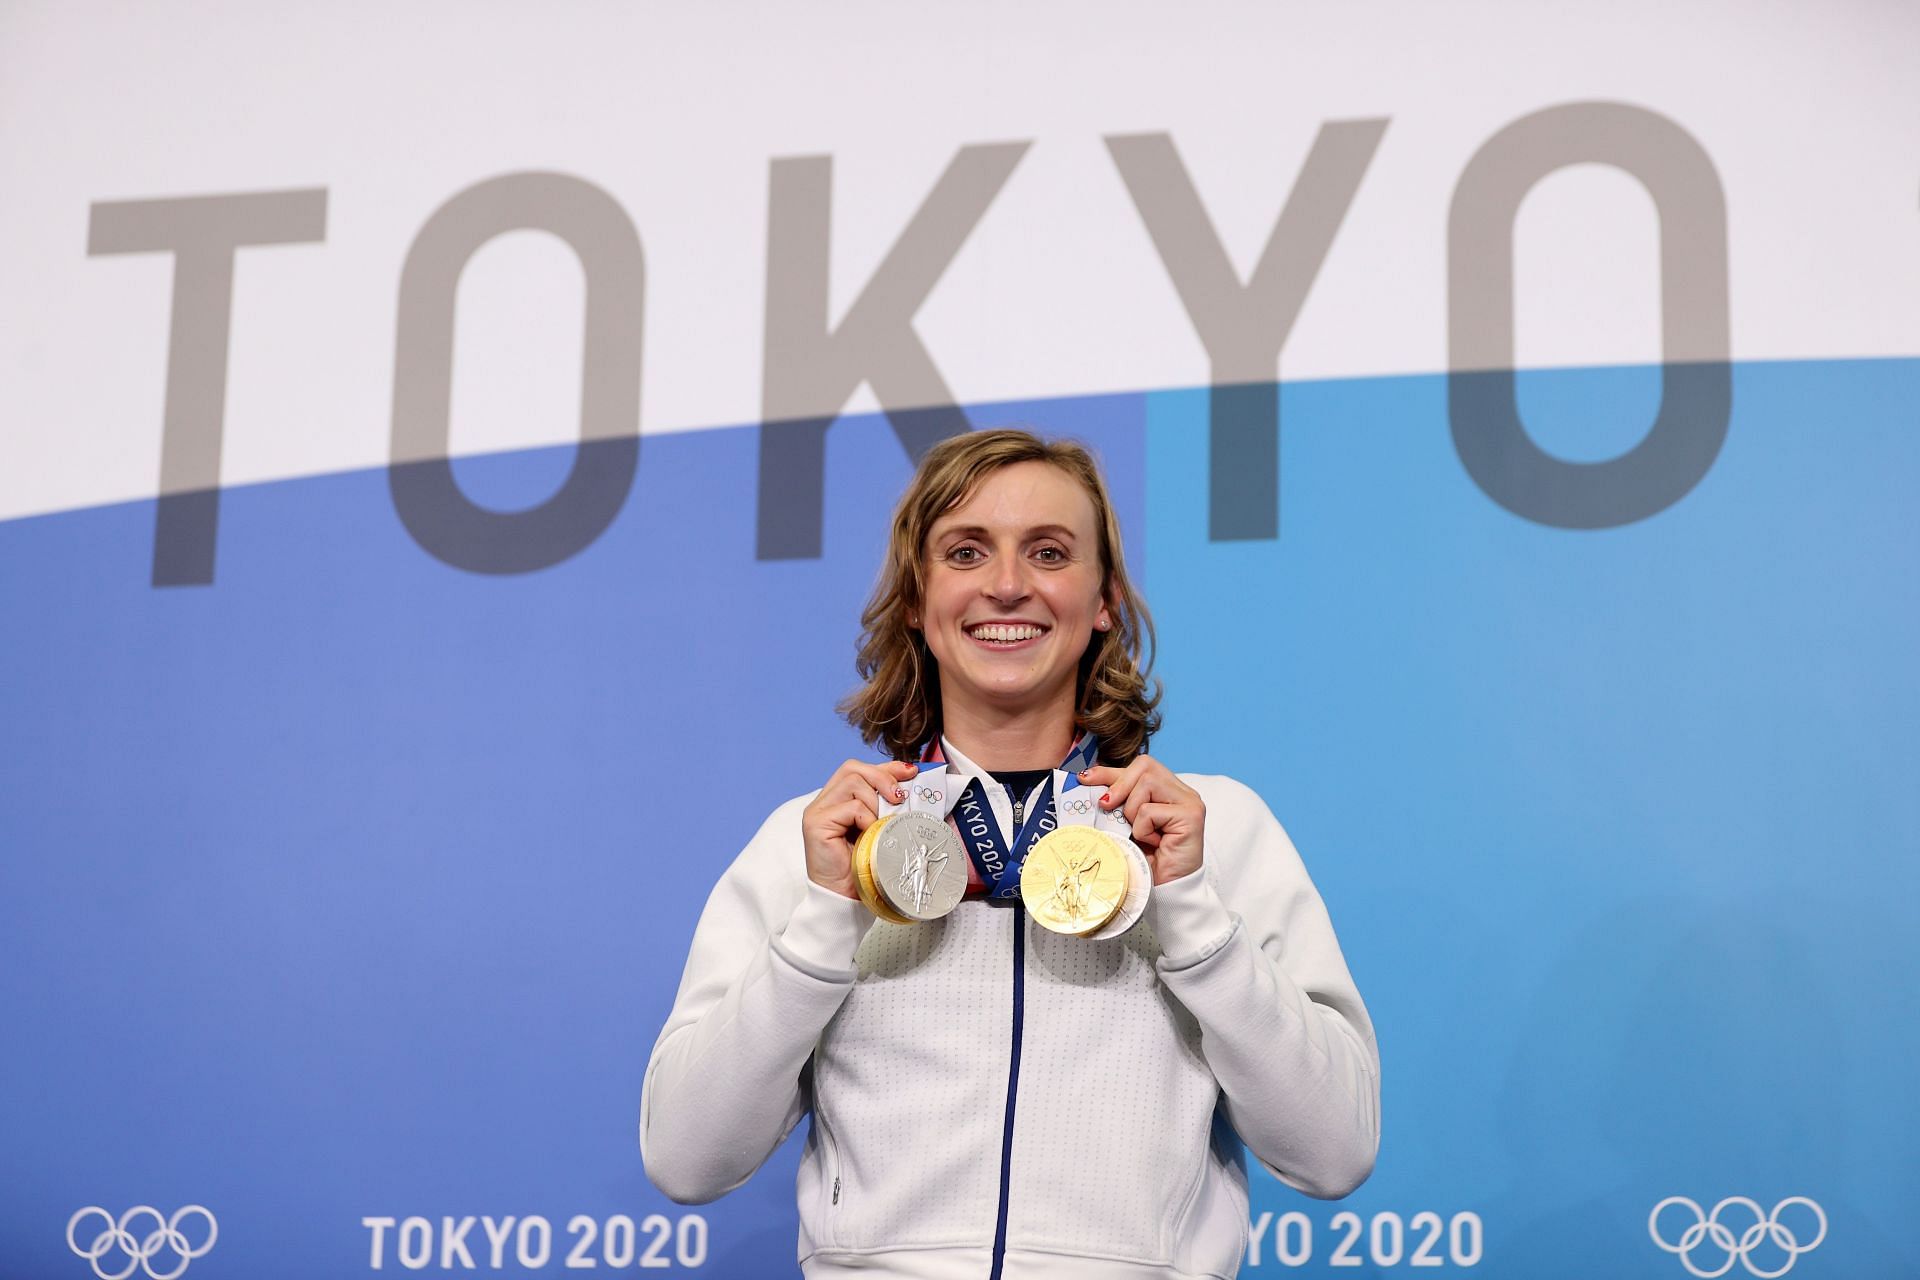 Katie Ledecky of Team USA poses with her two Gold and two Silver medals after a giving a press conference to the media during the Tokyo Olympic Games on July 31, 2021 in Tokyo, Japan. (Photo by Laurence Griffiths/Getty Images)